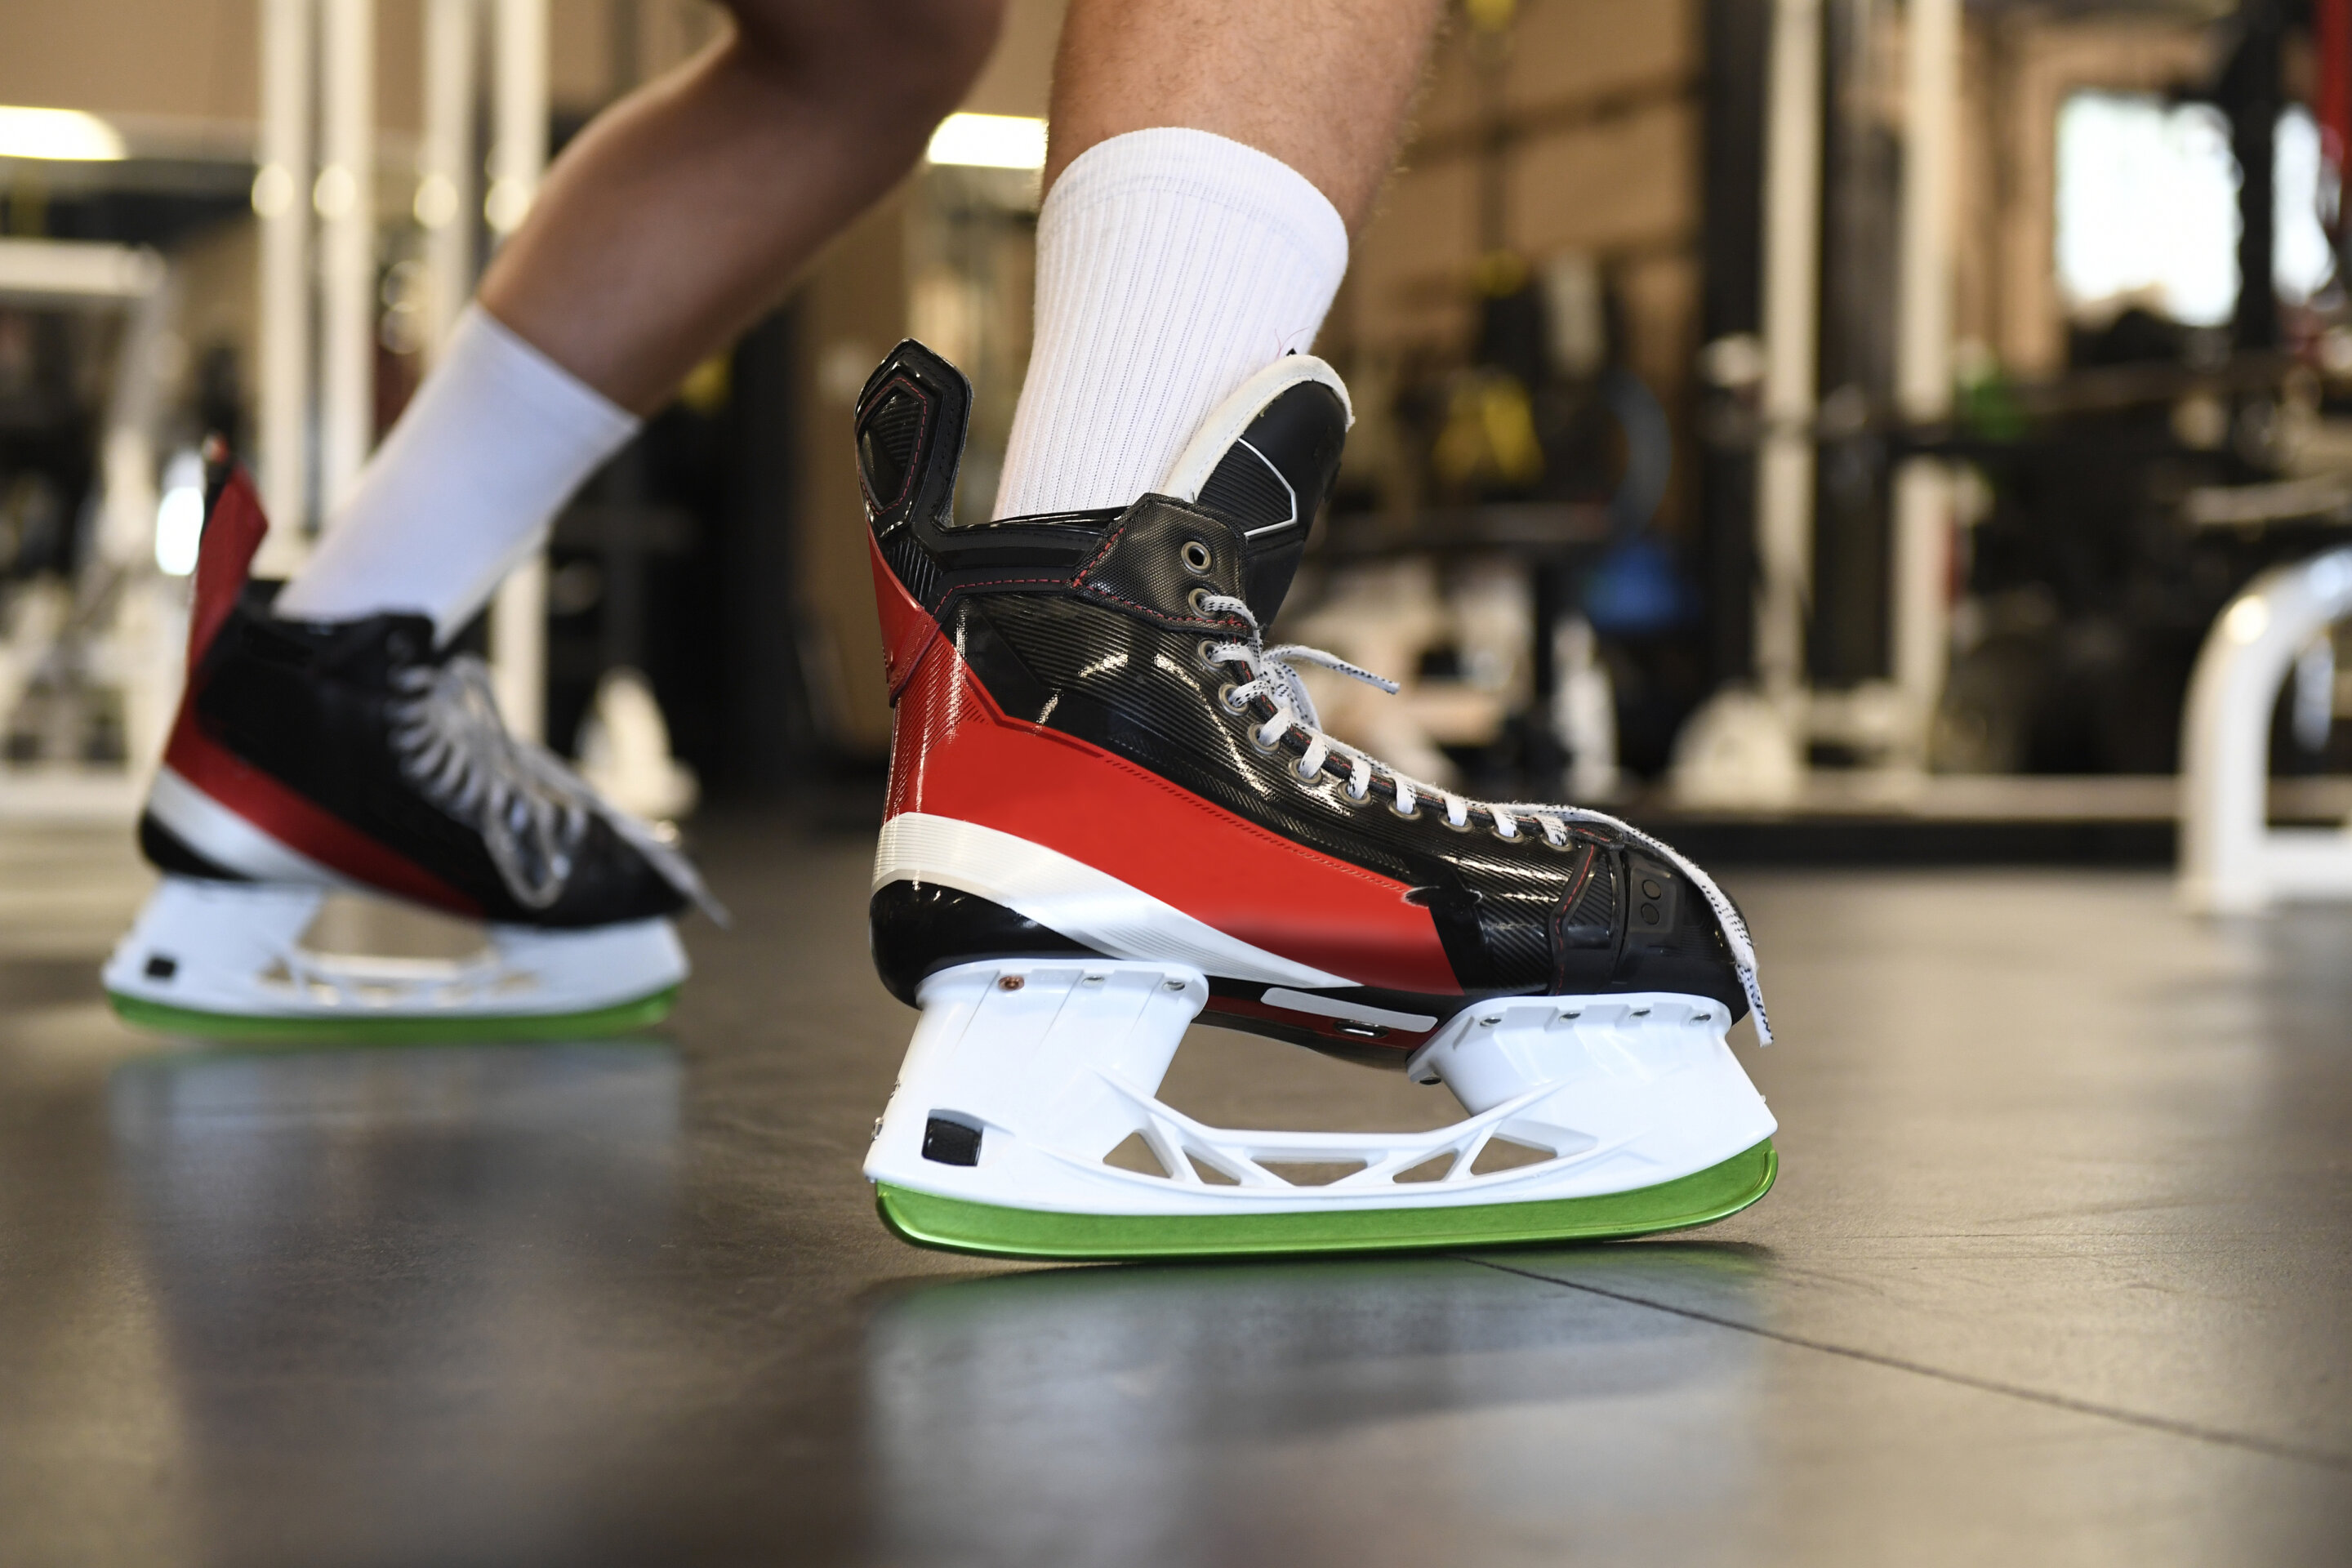 New skate blade for off-ice training unveiled